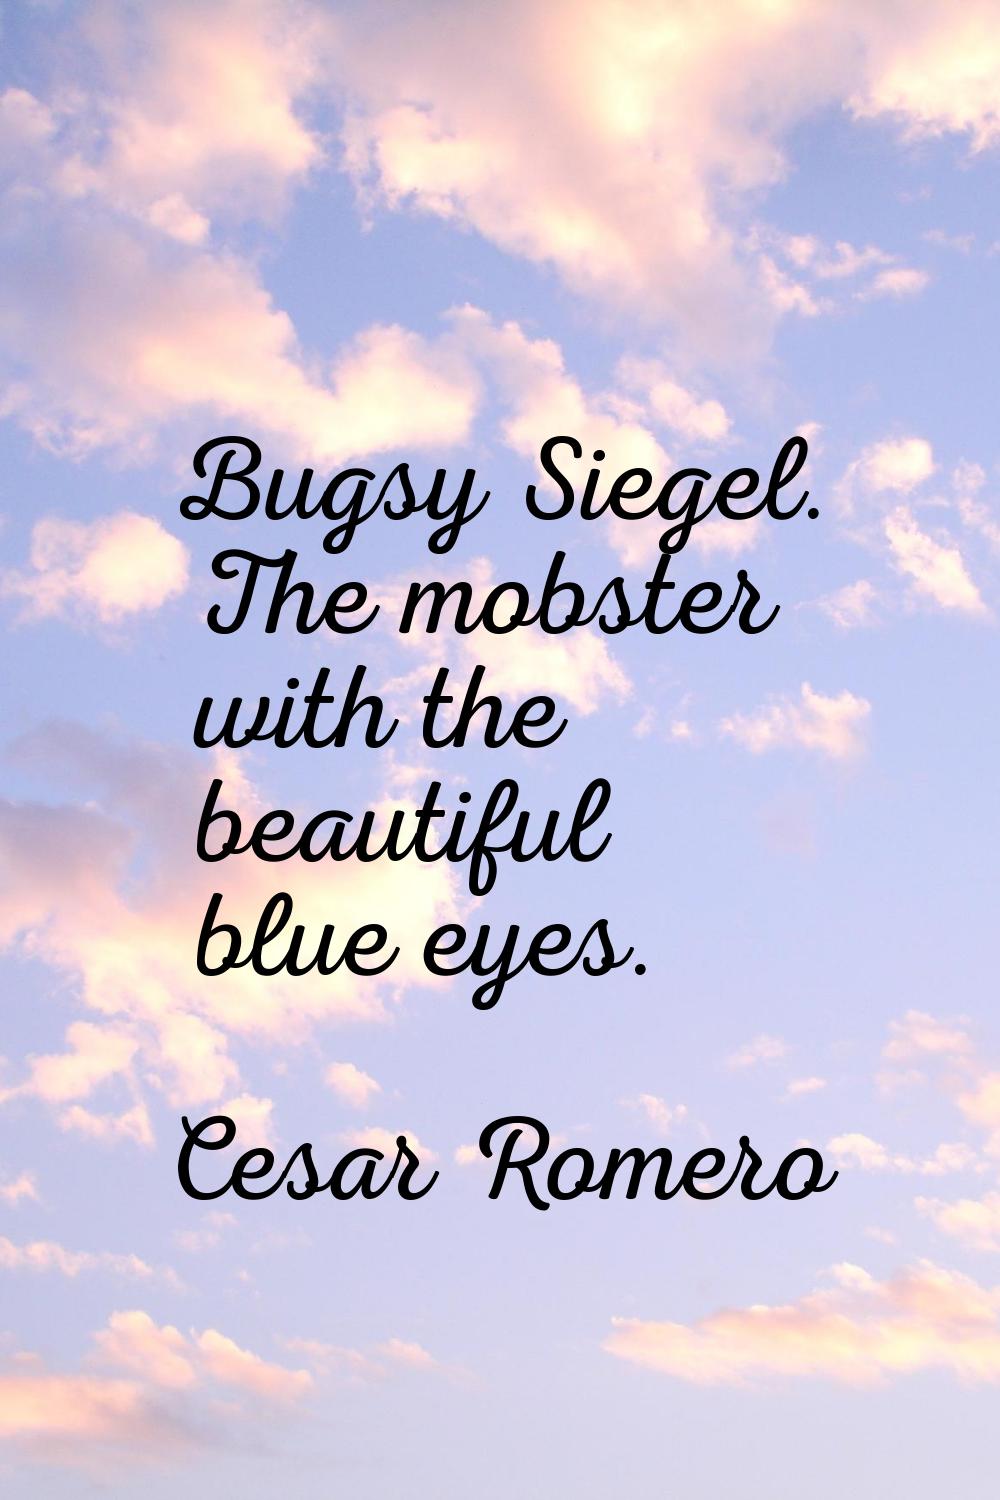 Bugsy Siegel. The mobster with the beautiful blue eyes.